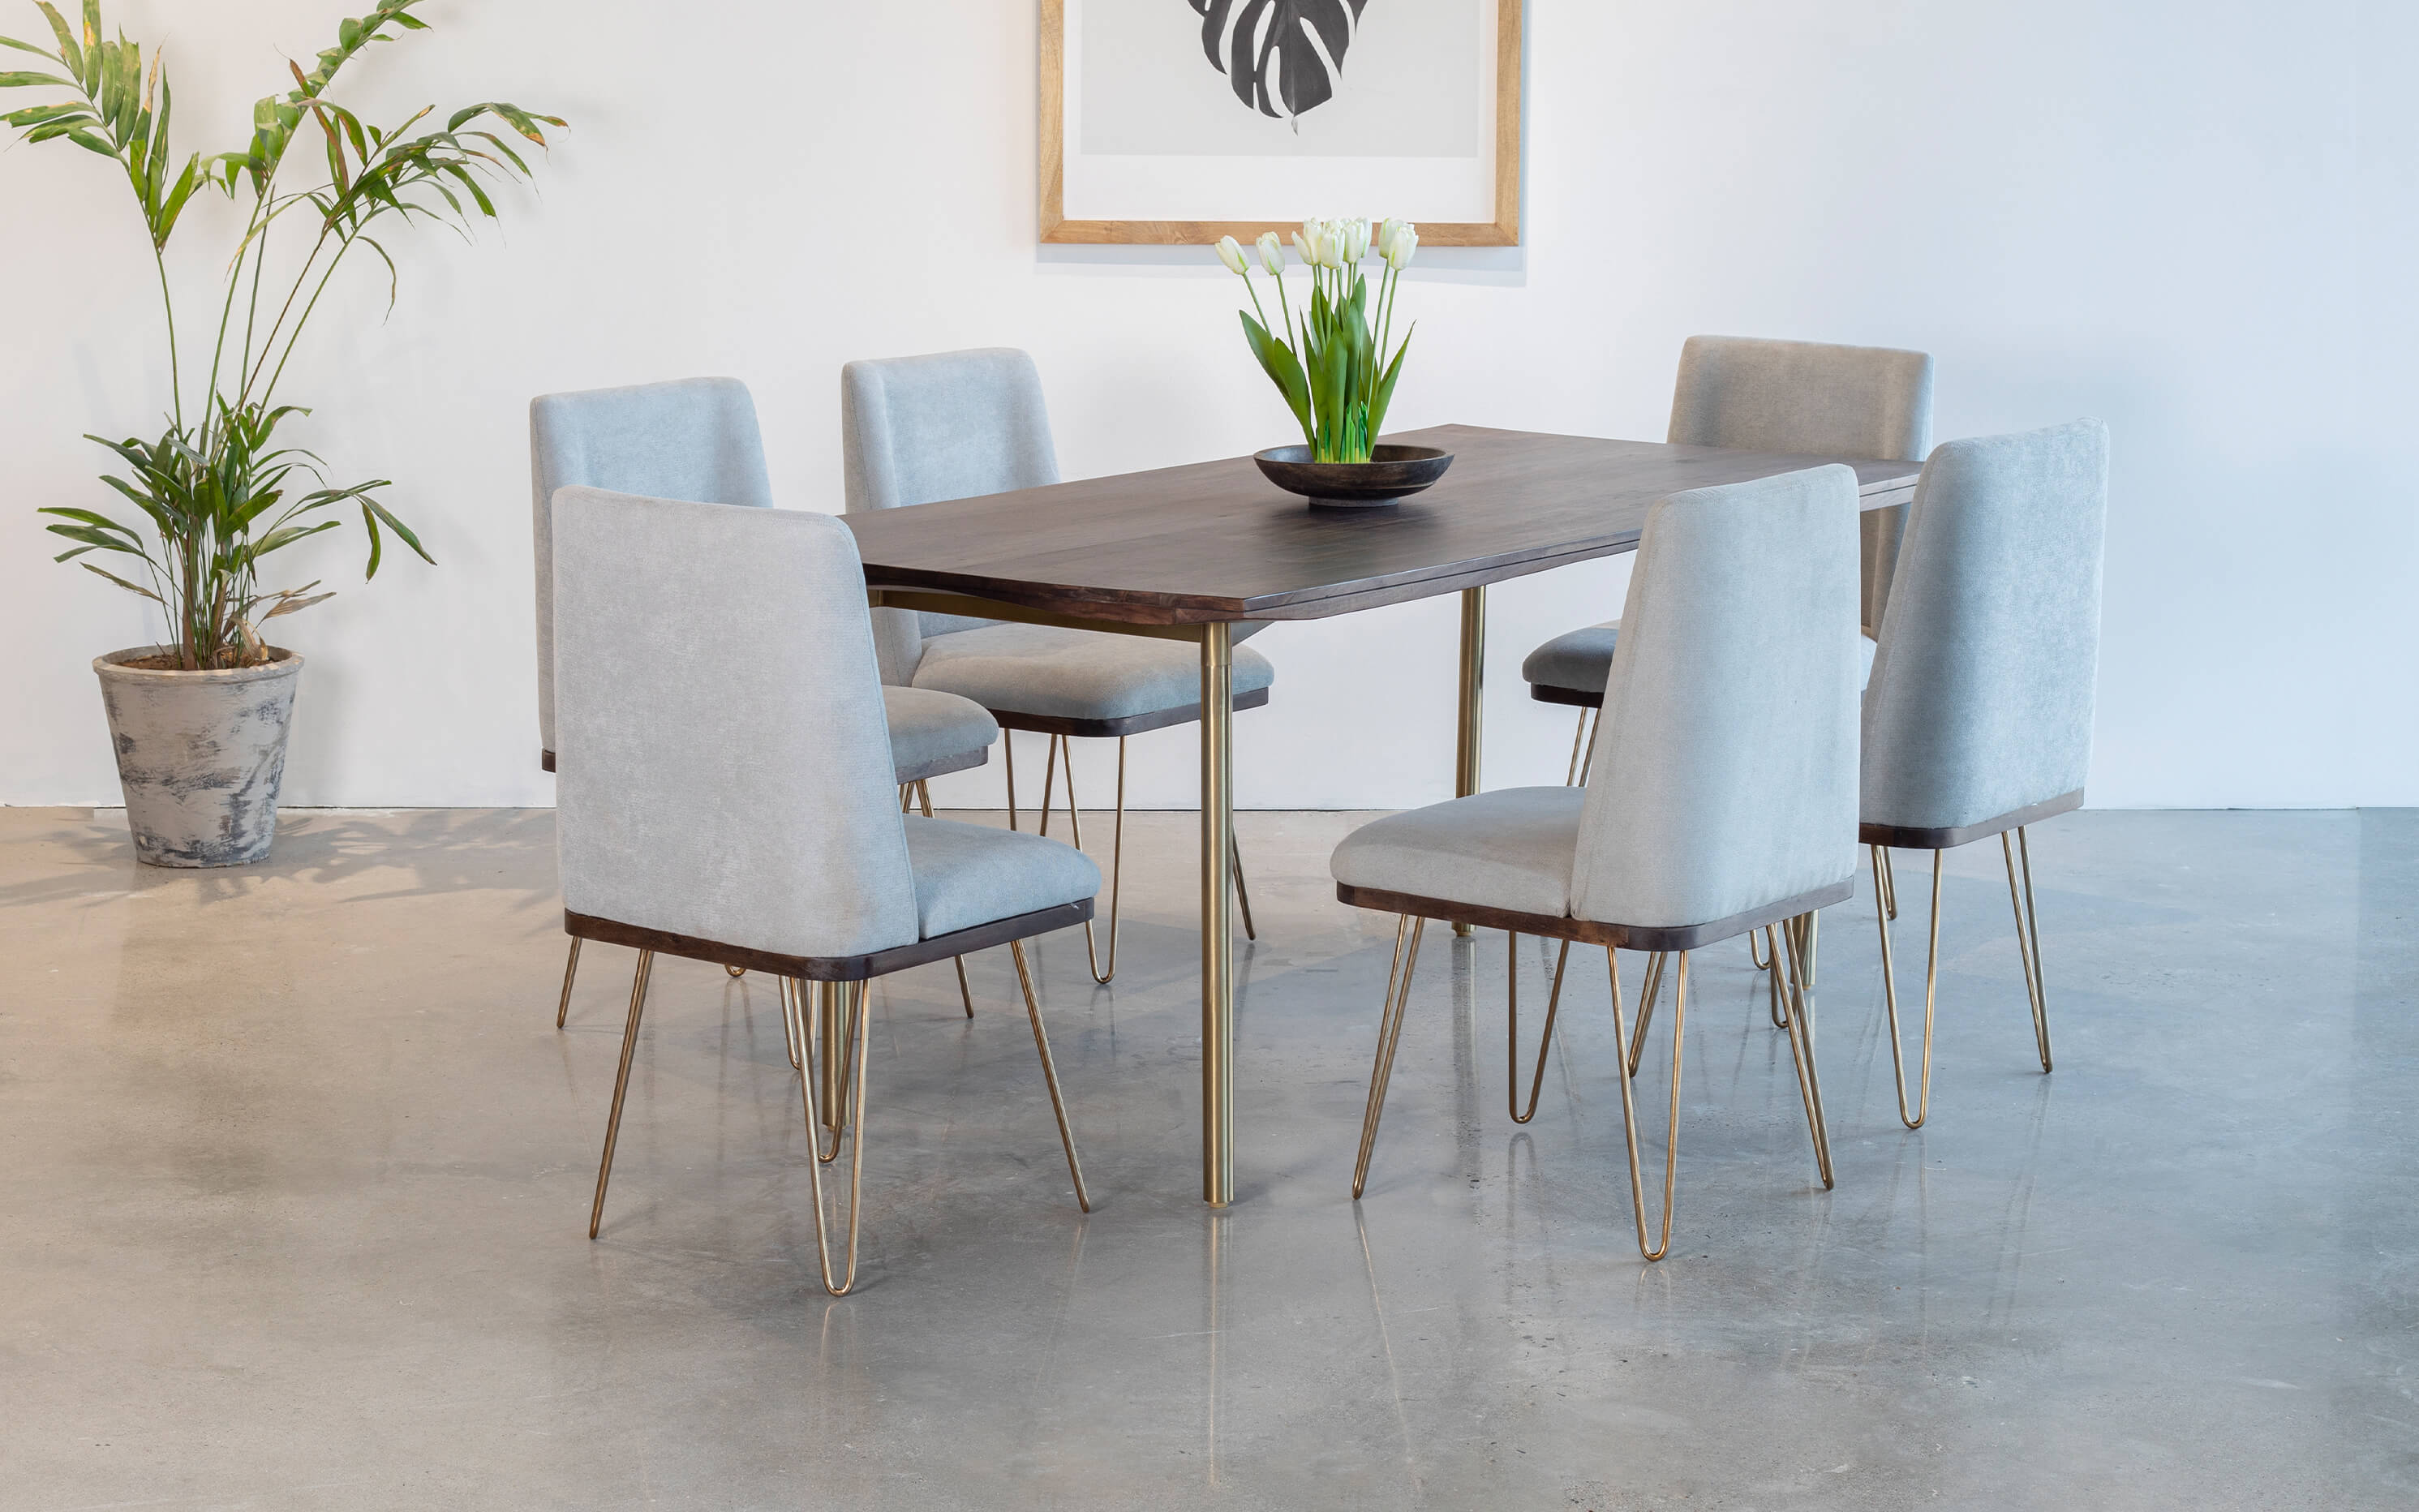 Barcelona Dining Table With 6 Without Arm Chairs - Orange Tree Home Pvt. Ltd.